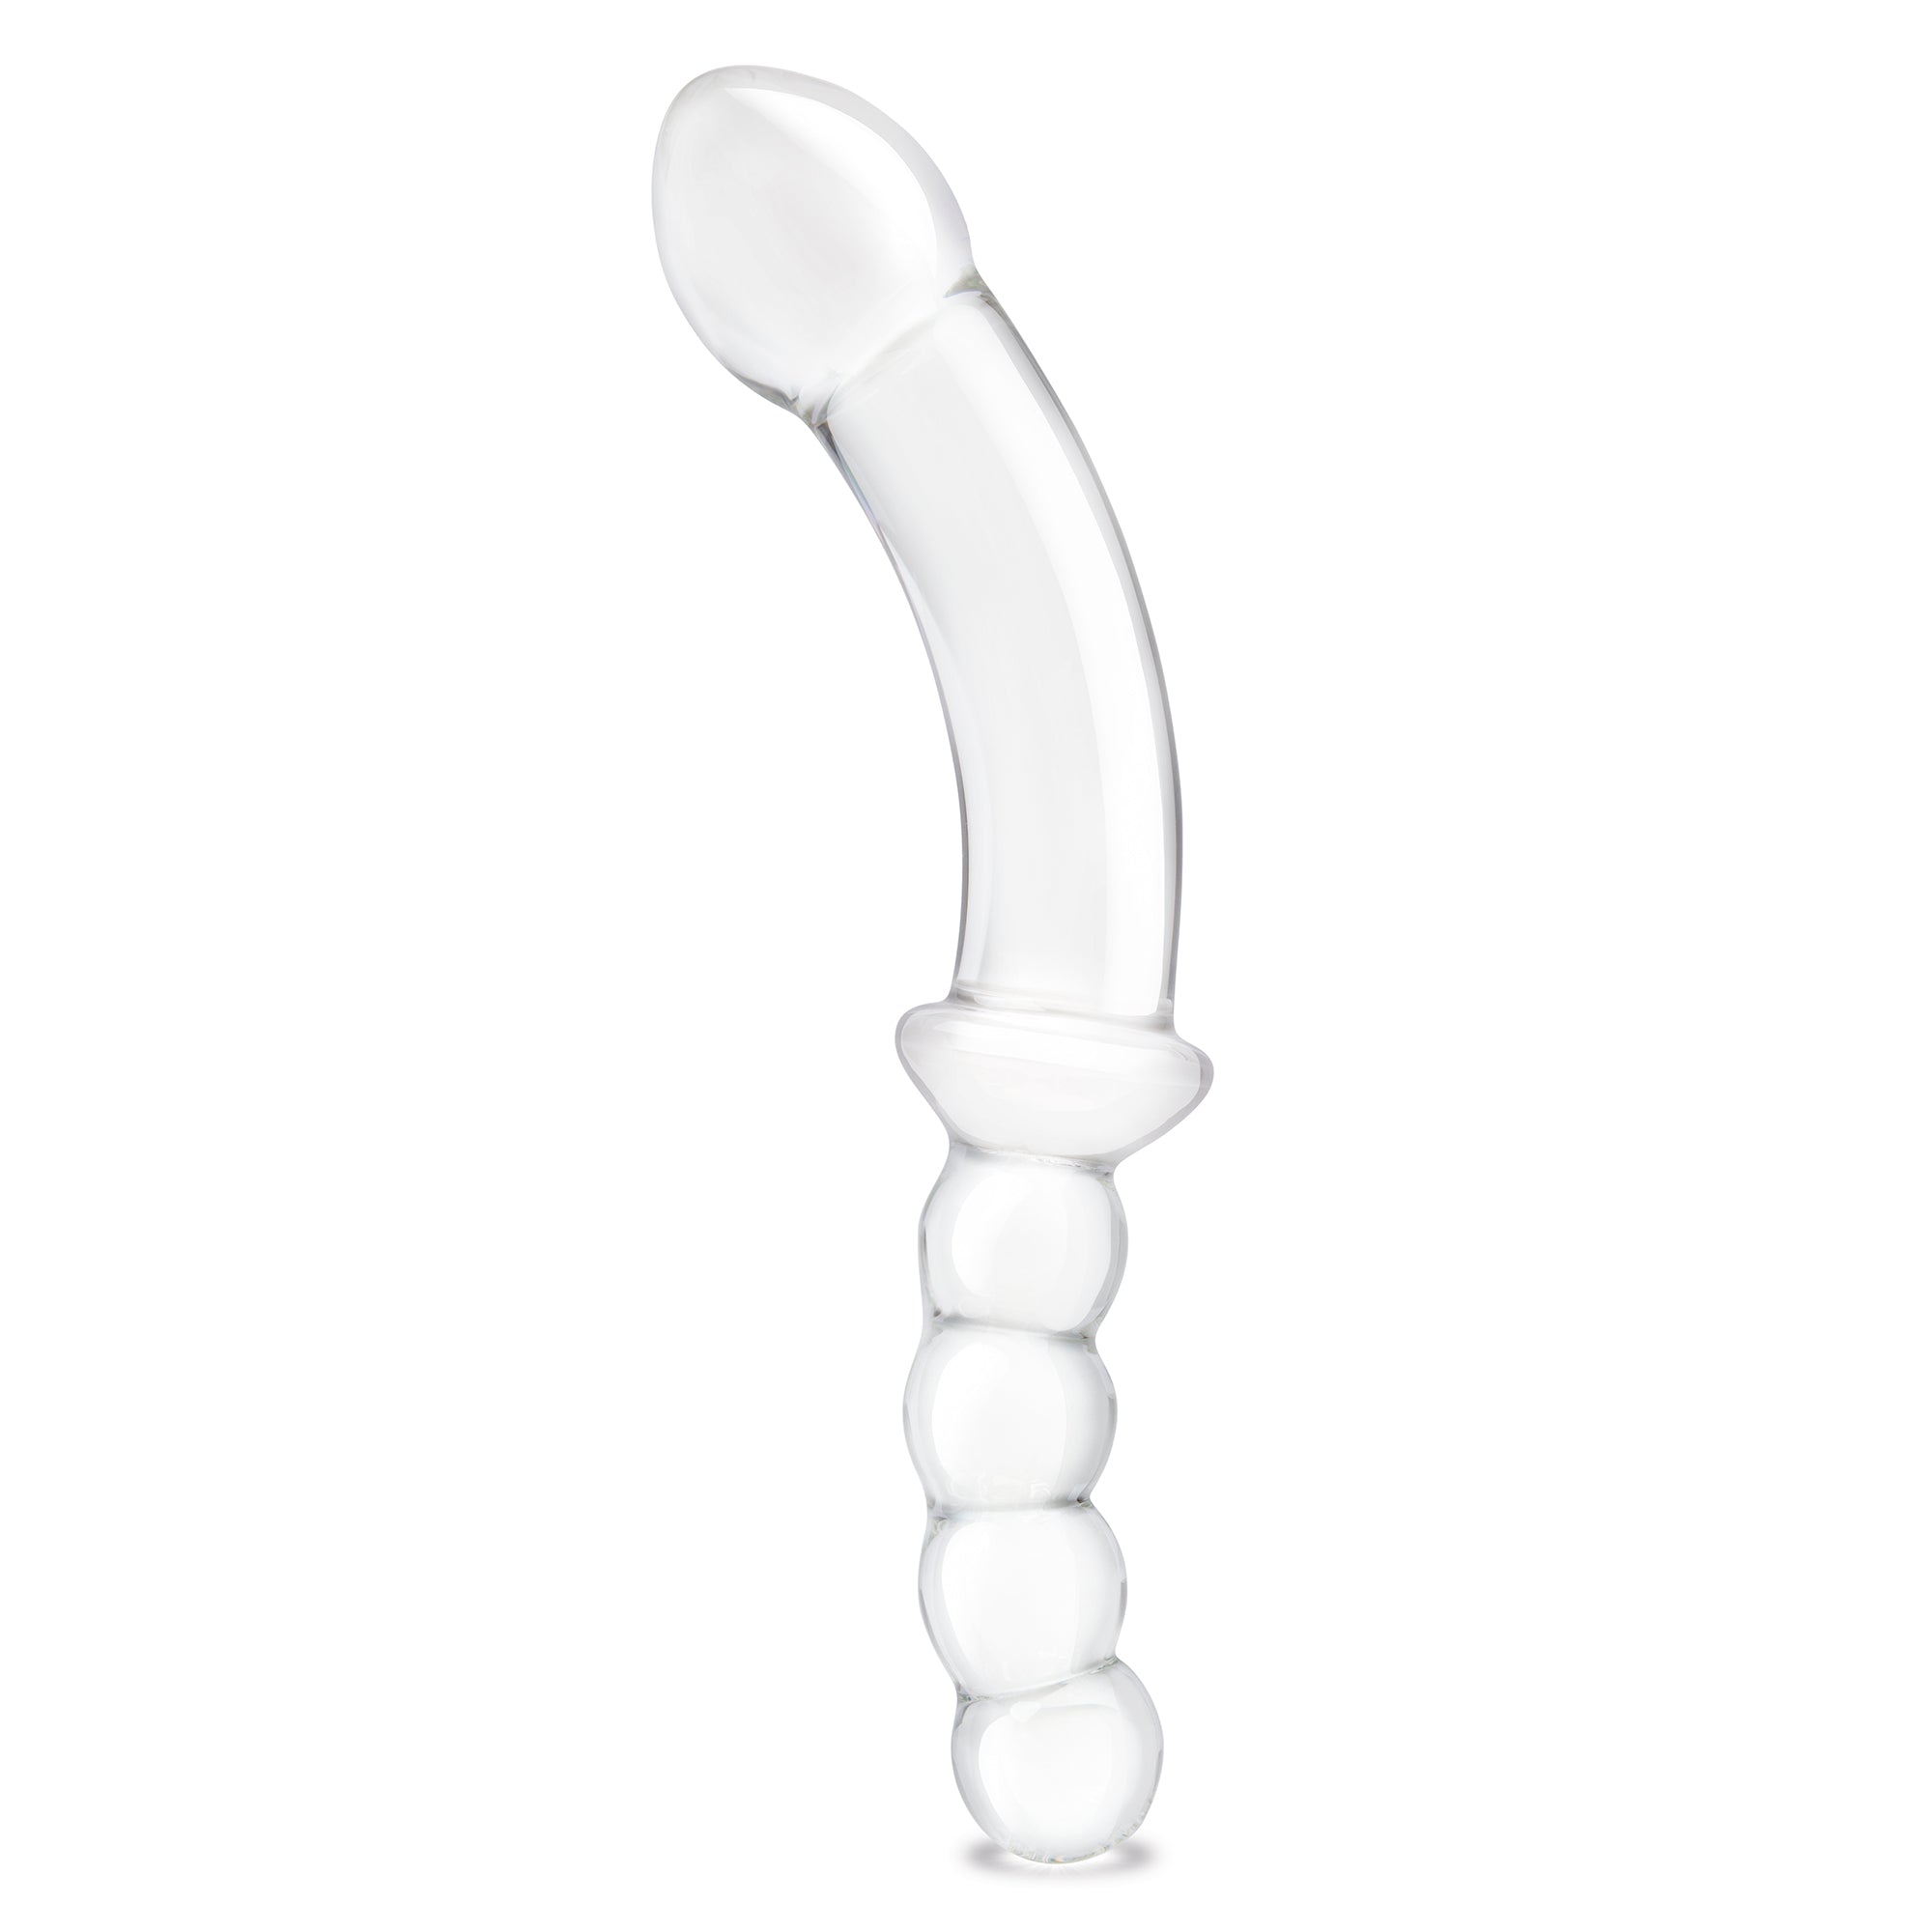 12.5" Girthy Double Sided Dong With Anal Bead Grip Handle